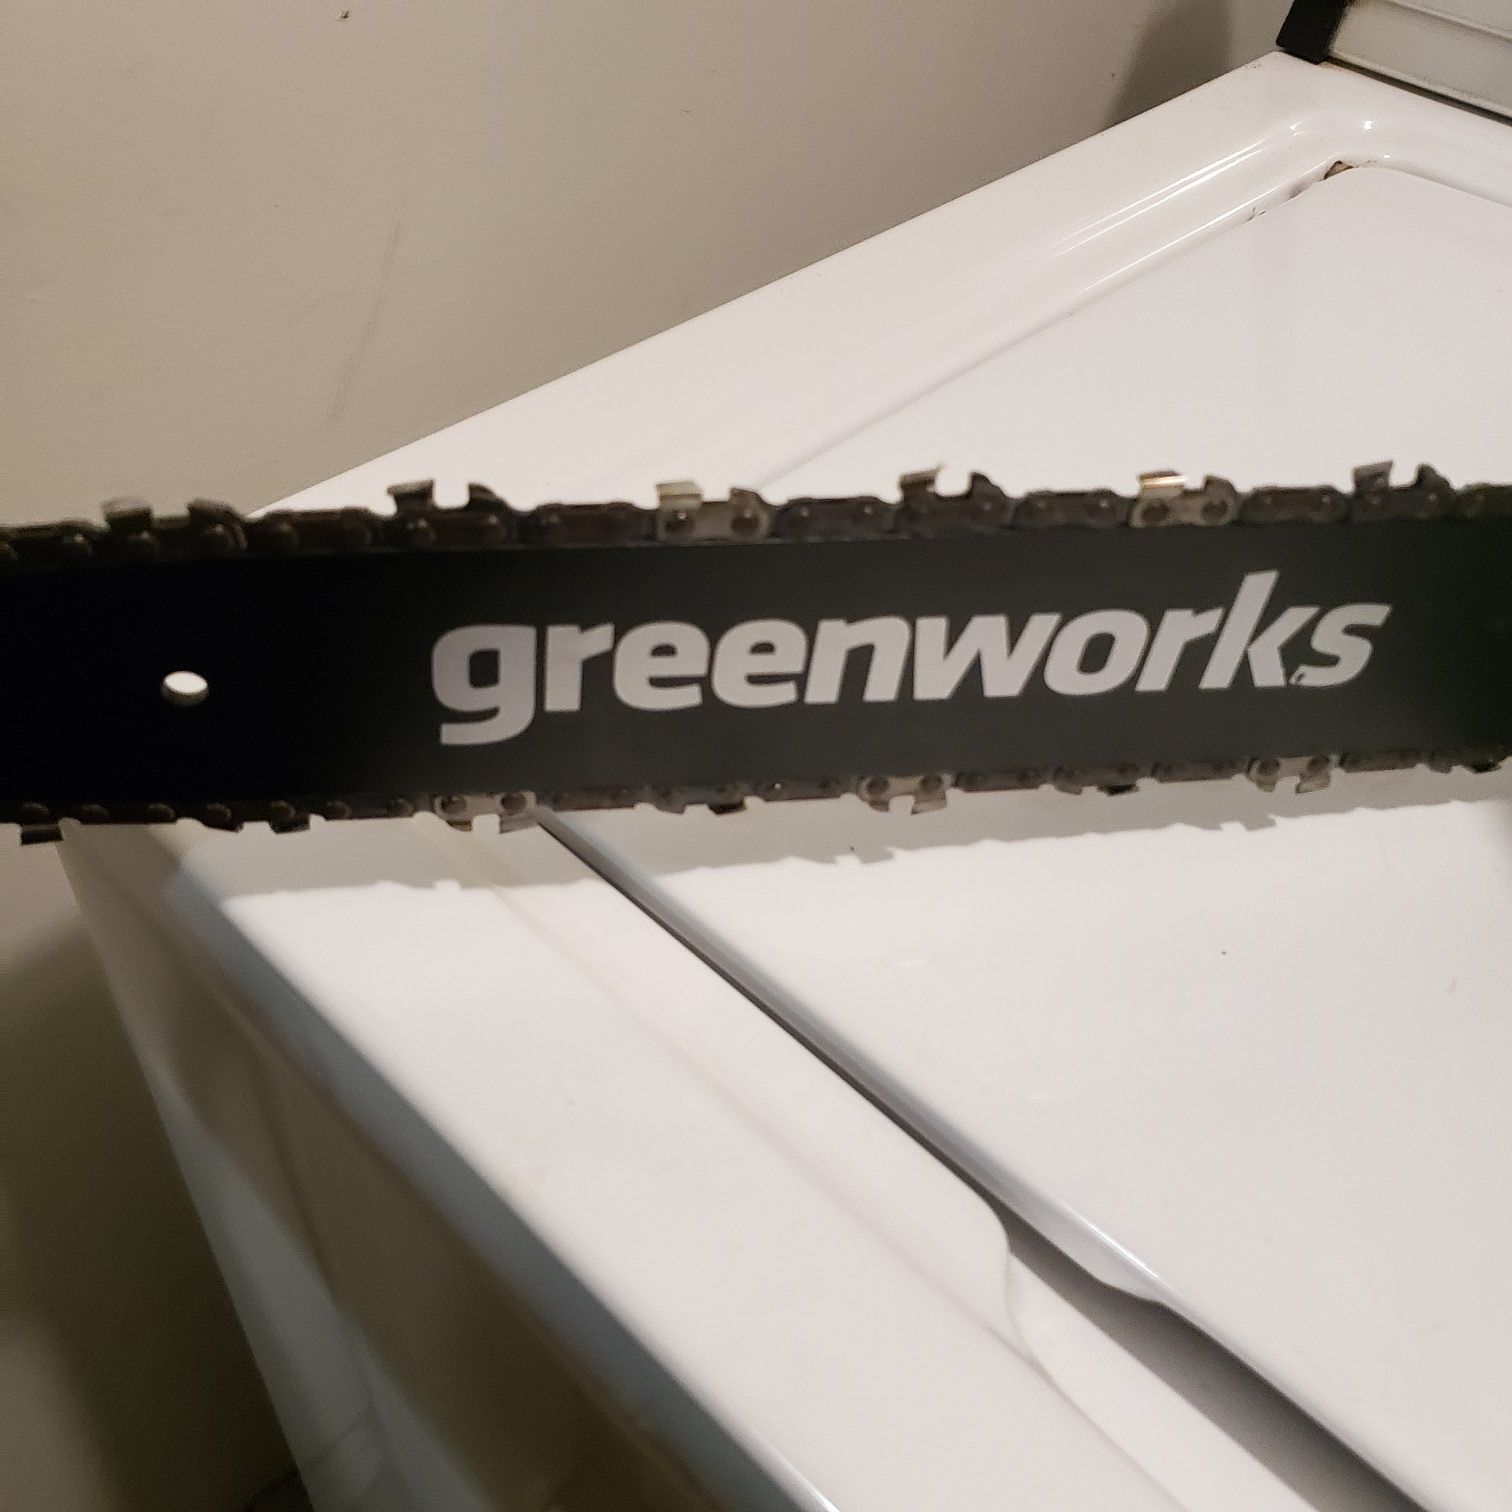 14 inch bladeGreen works chain saw needs battery and charger